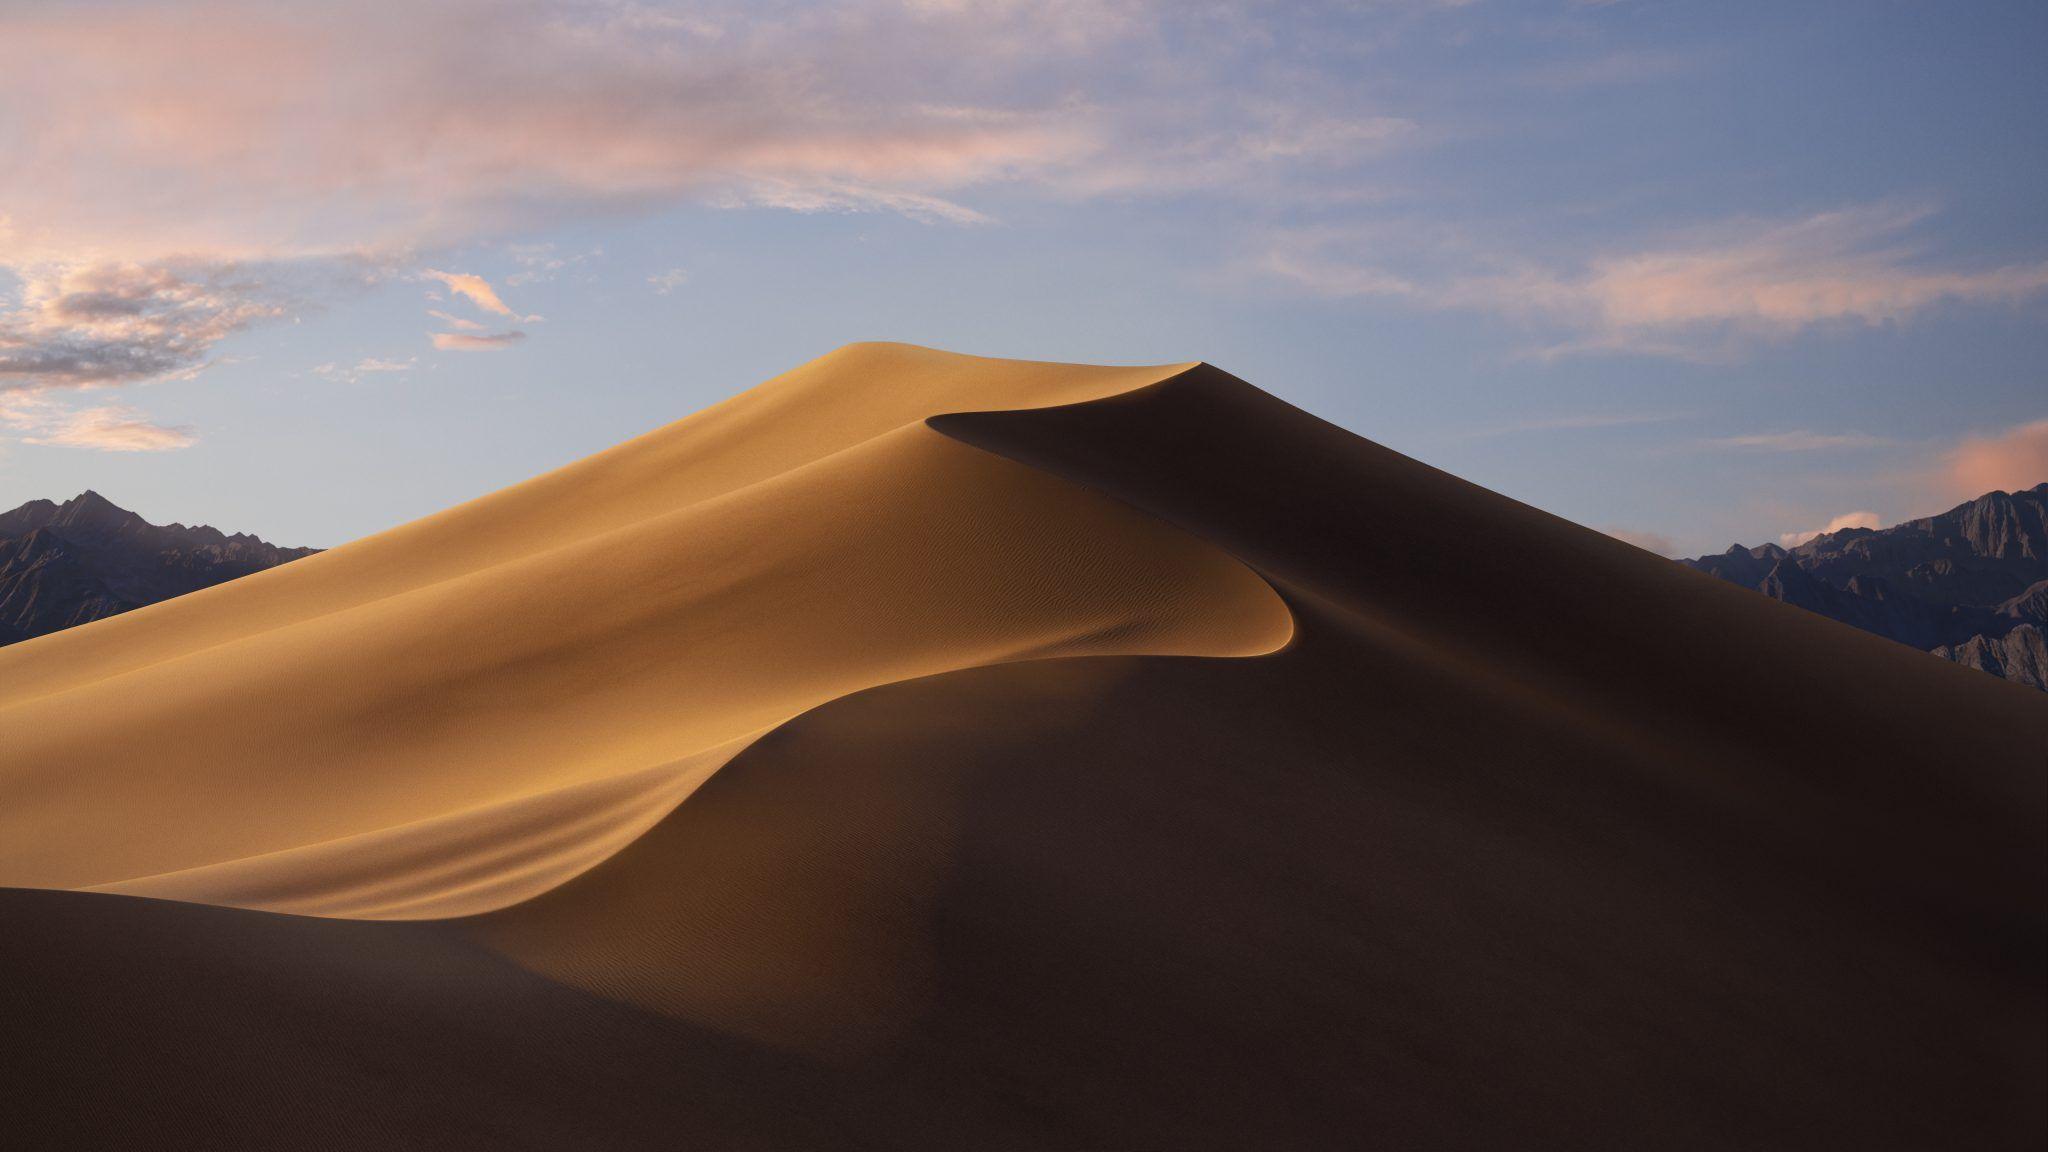 Here are the new macOS Mojave and iOS 12 Wallpaper